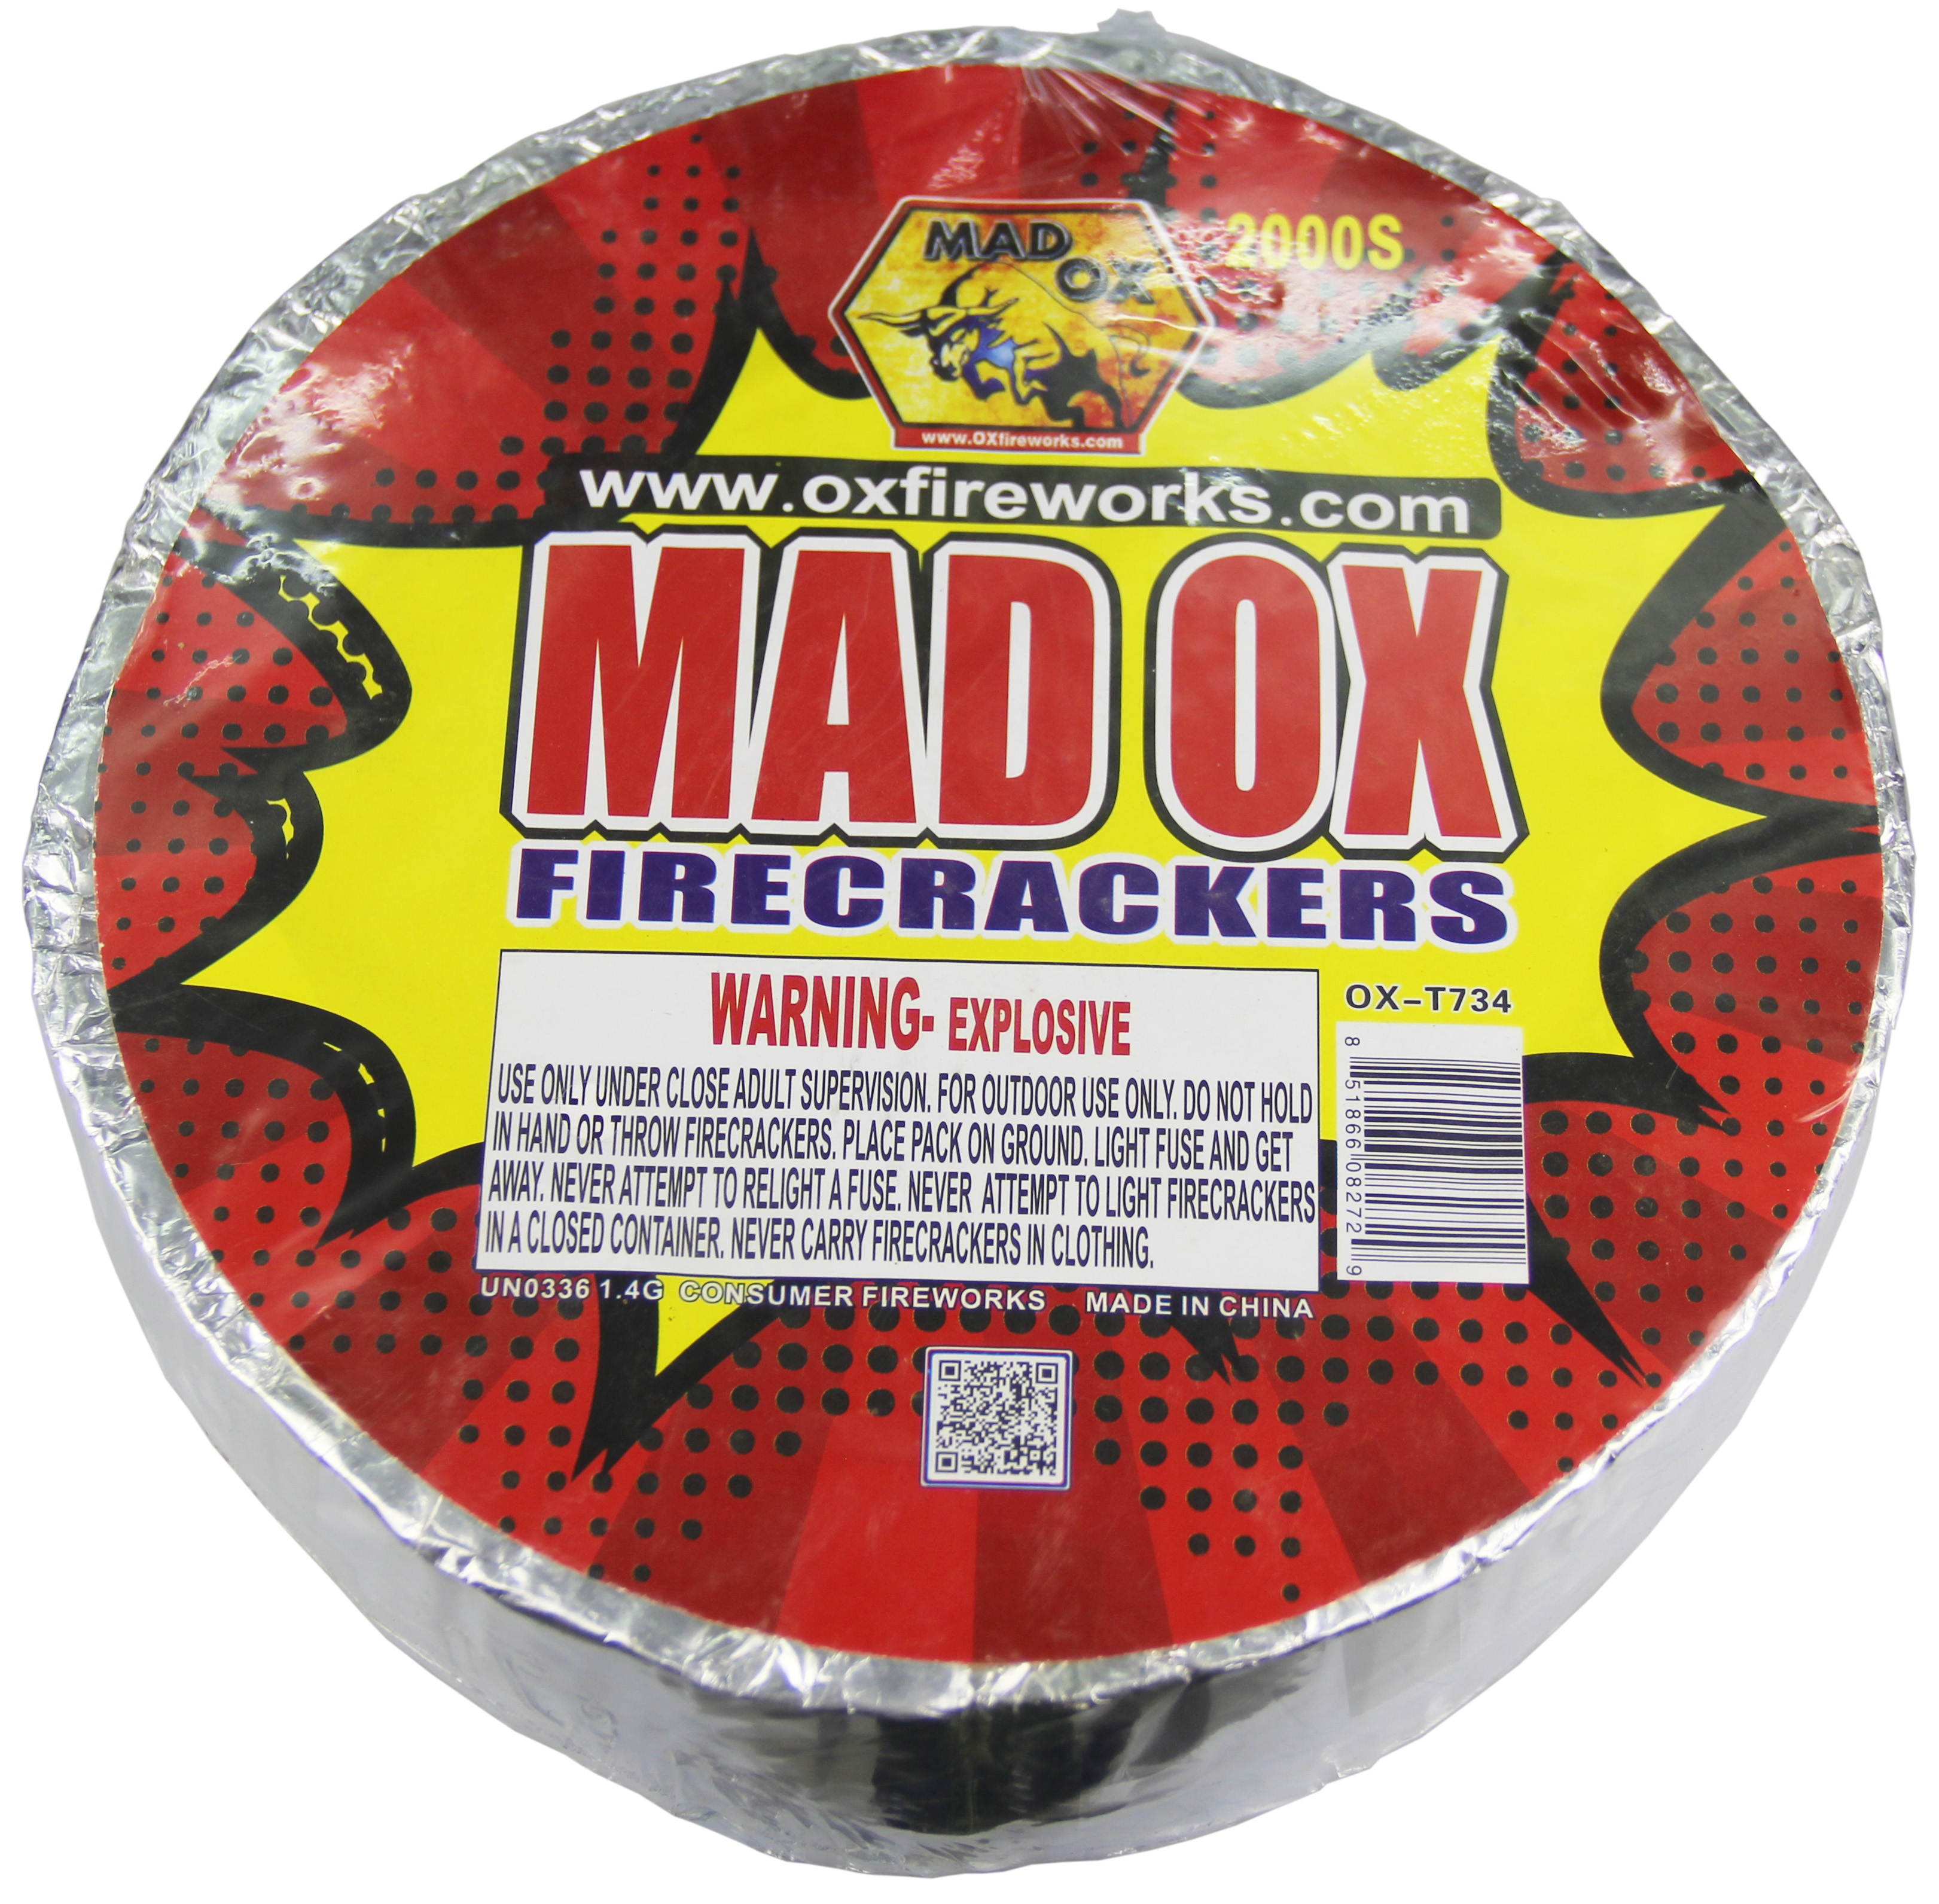 Mad Ox Firecrackers 2,000'S Roll